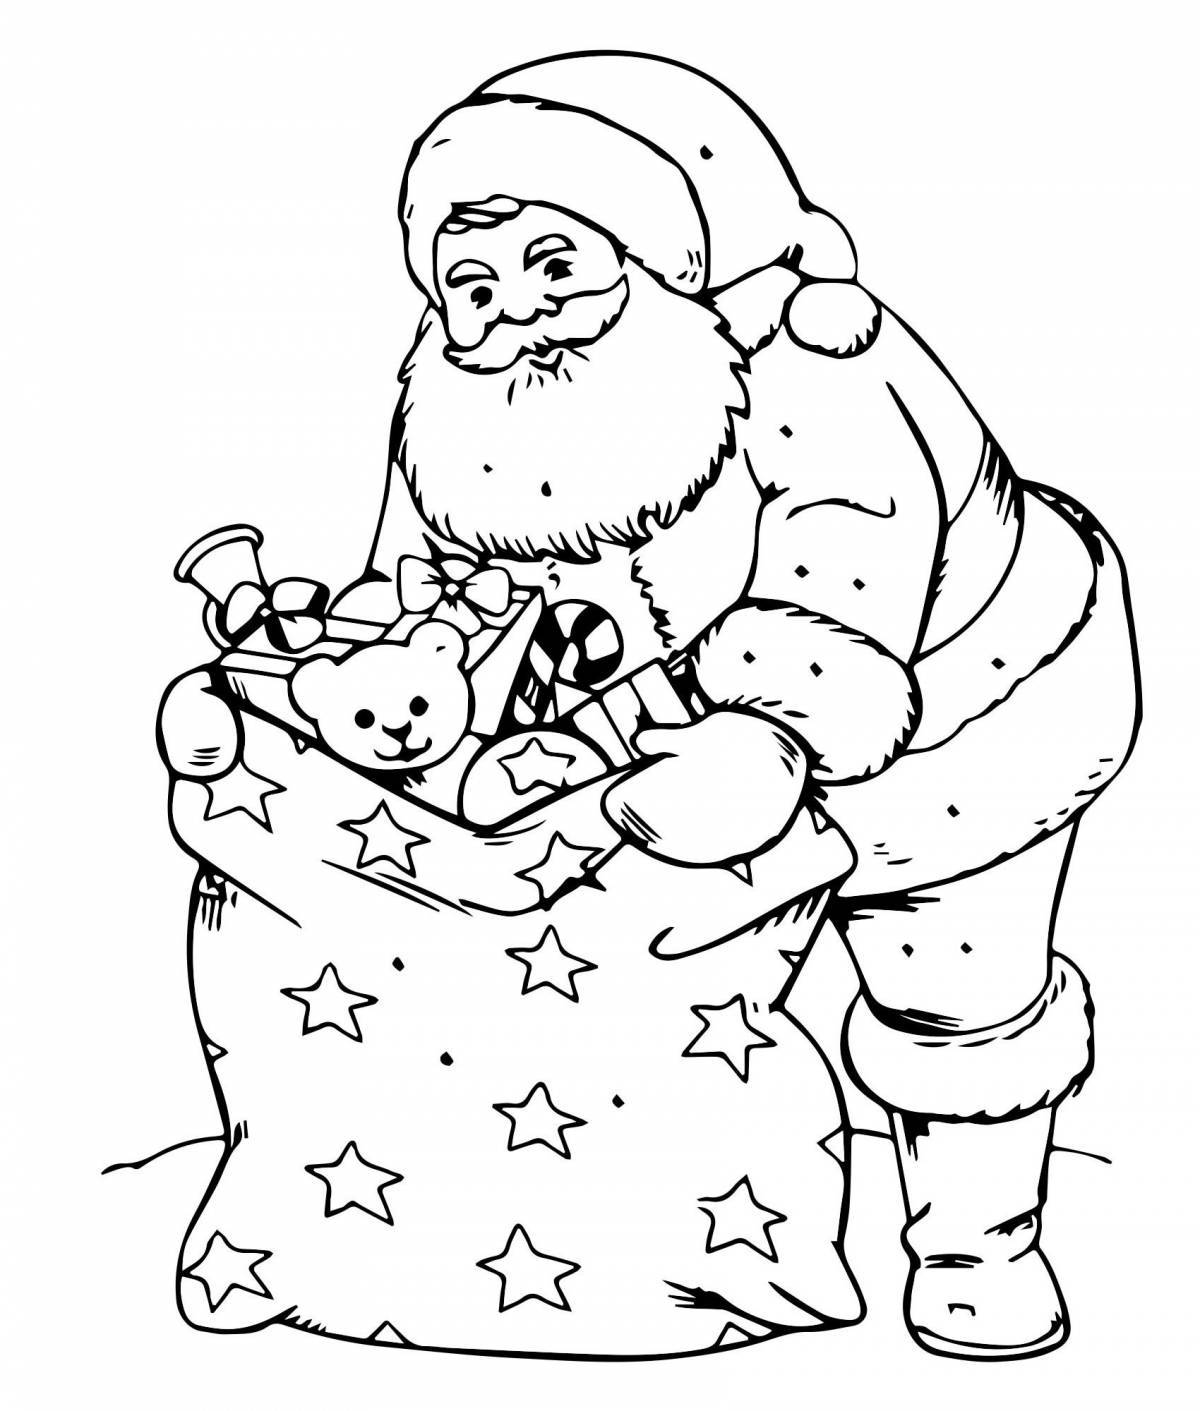 Exciting Christmas coloring book for boys